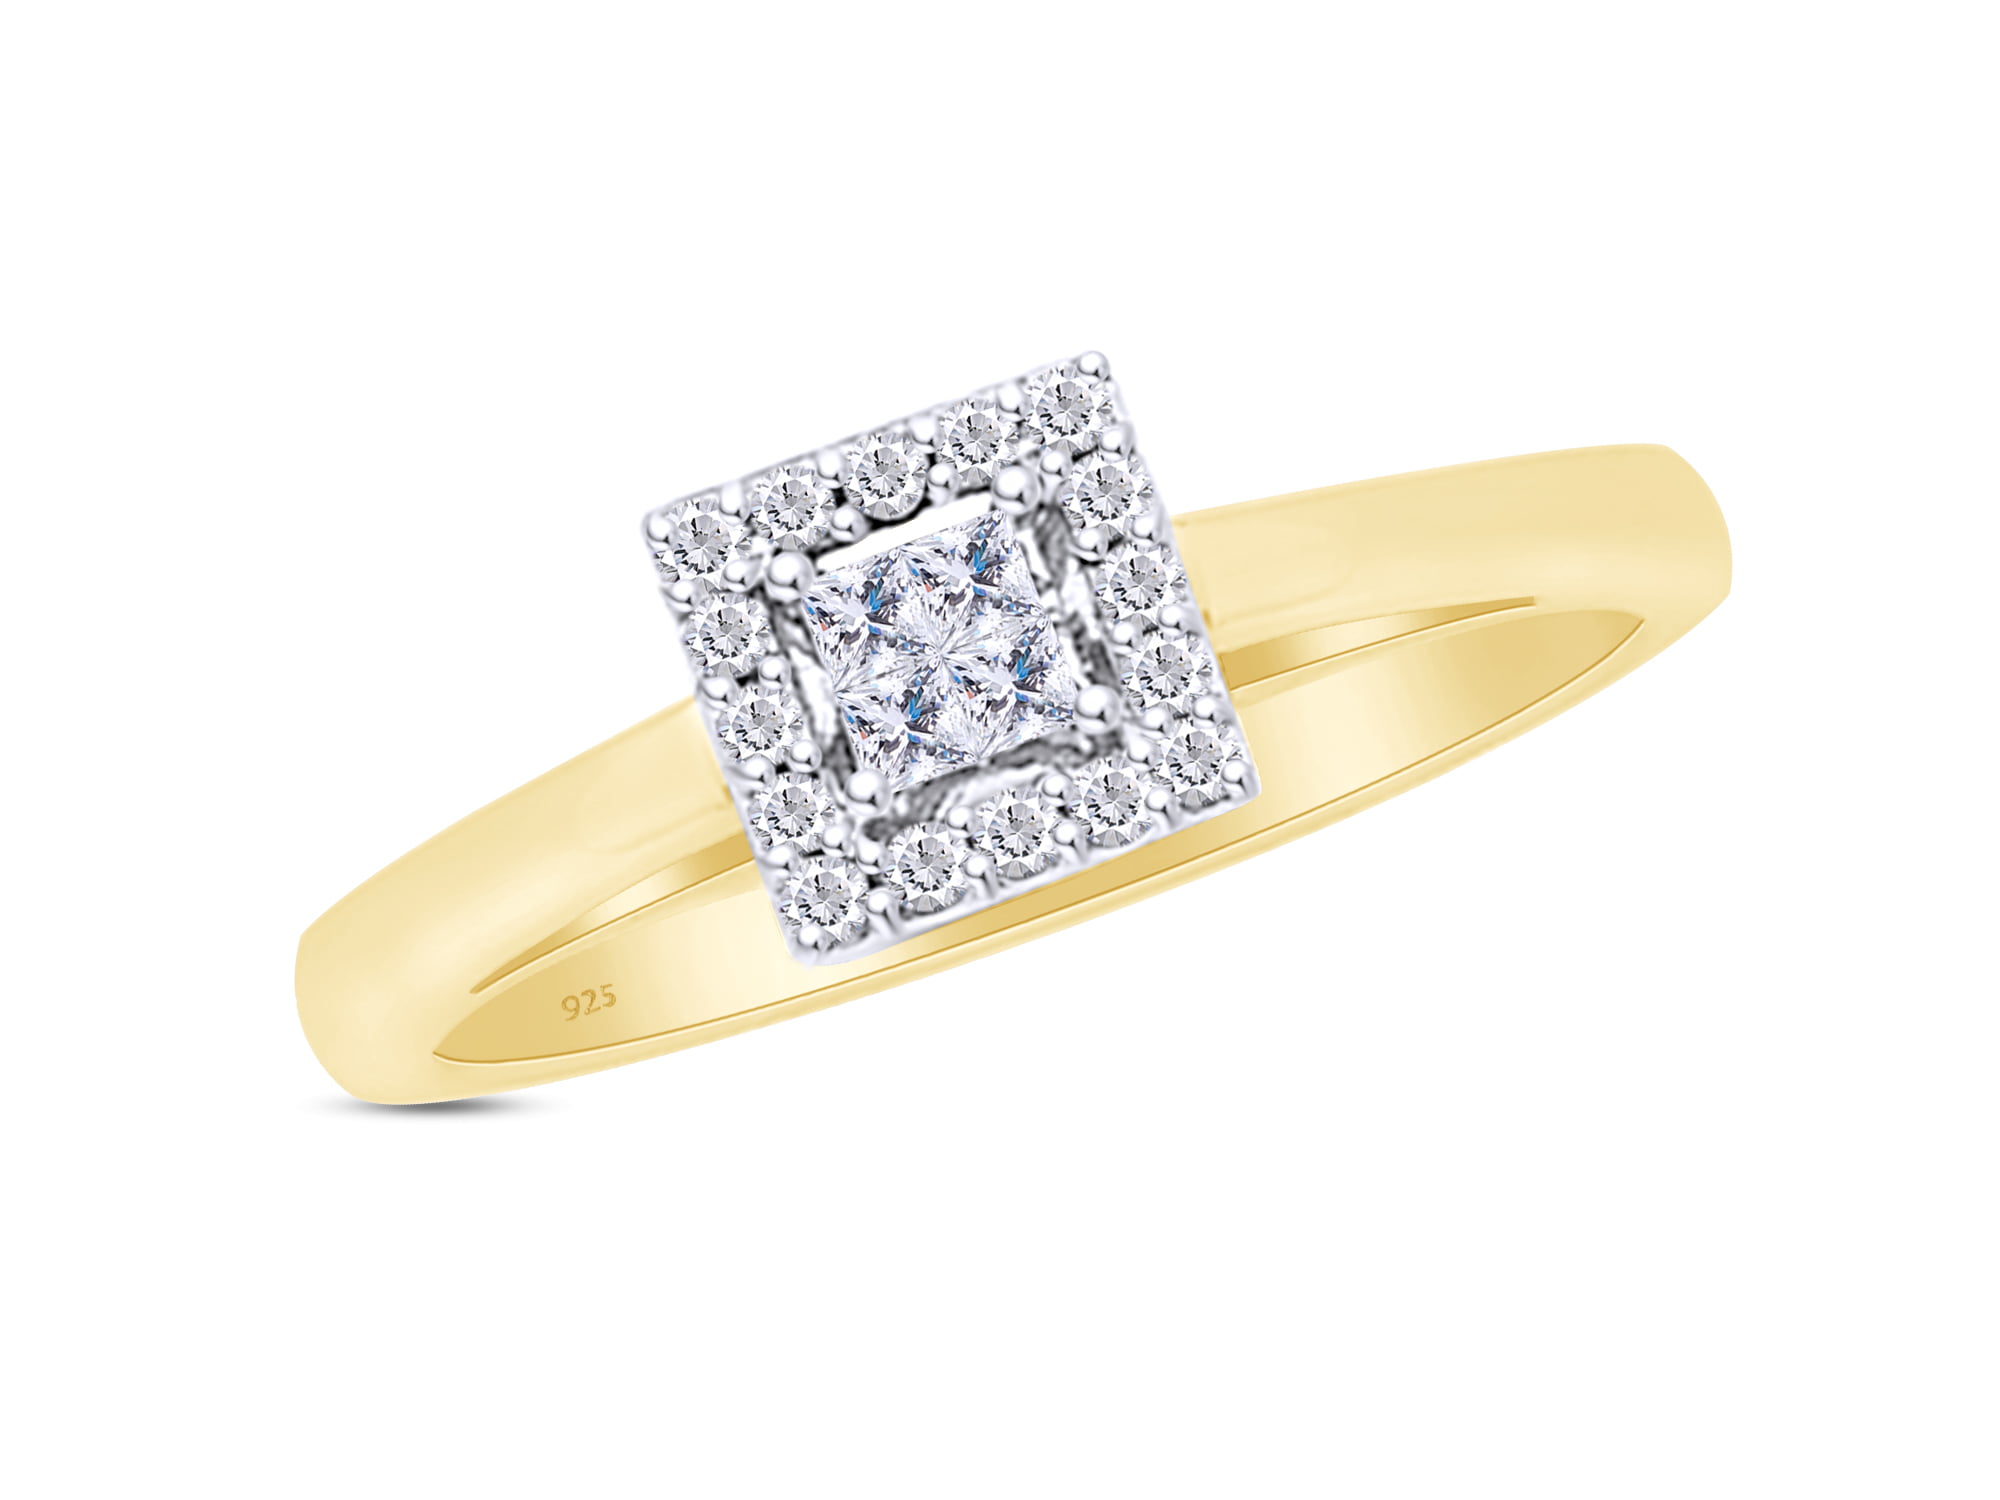 Wishrocks Round Cut White Cubic Zirconia Halo Engagement Ring in 14K Yellow Gold Over Sterling Silver